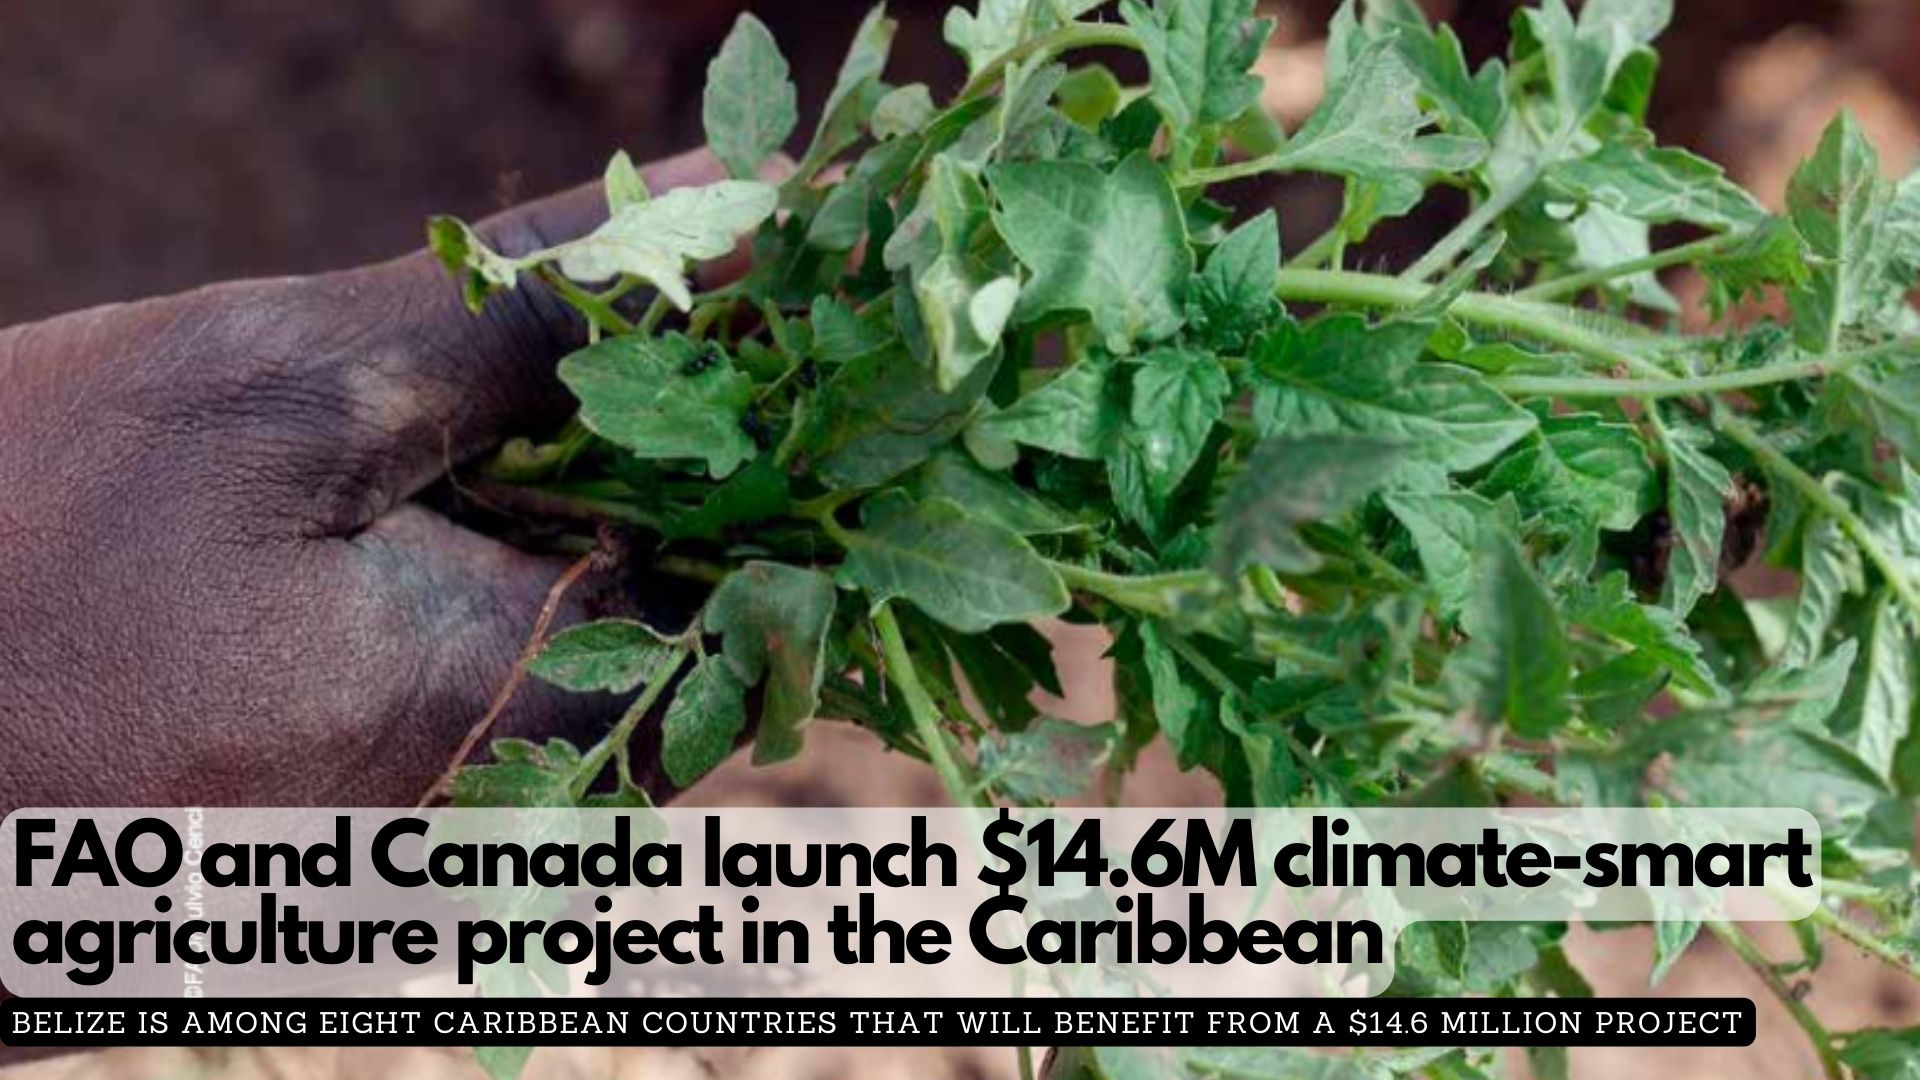 FAO and Canada launch $14.6M climate-smart agriculture project in the Caribbean